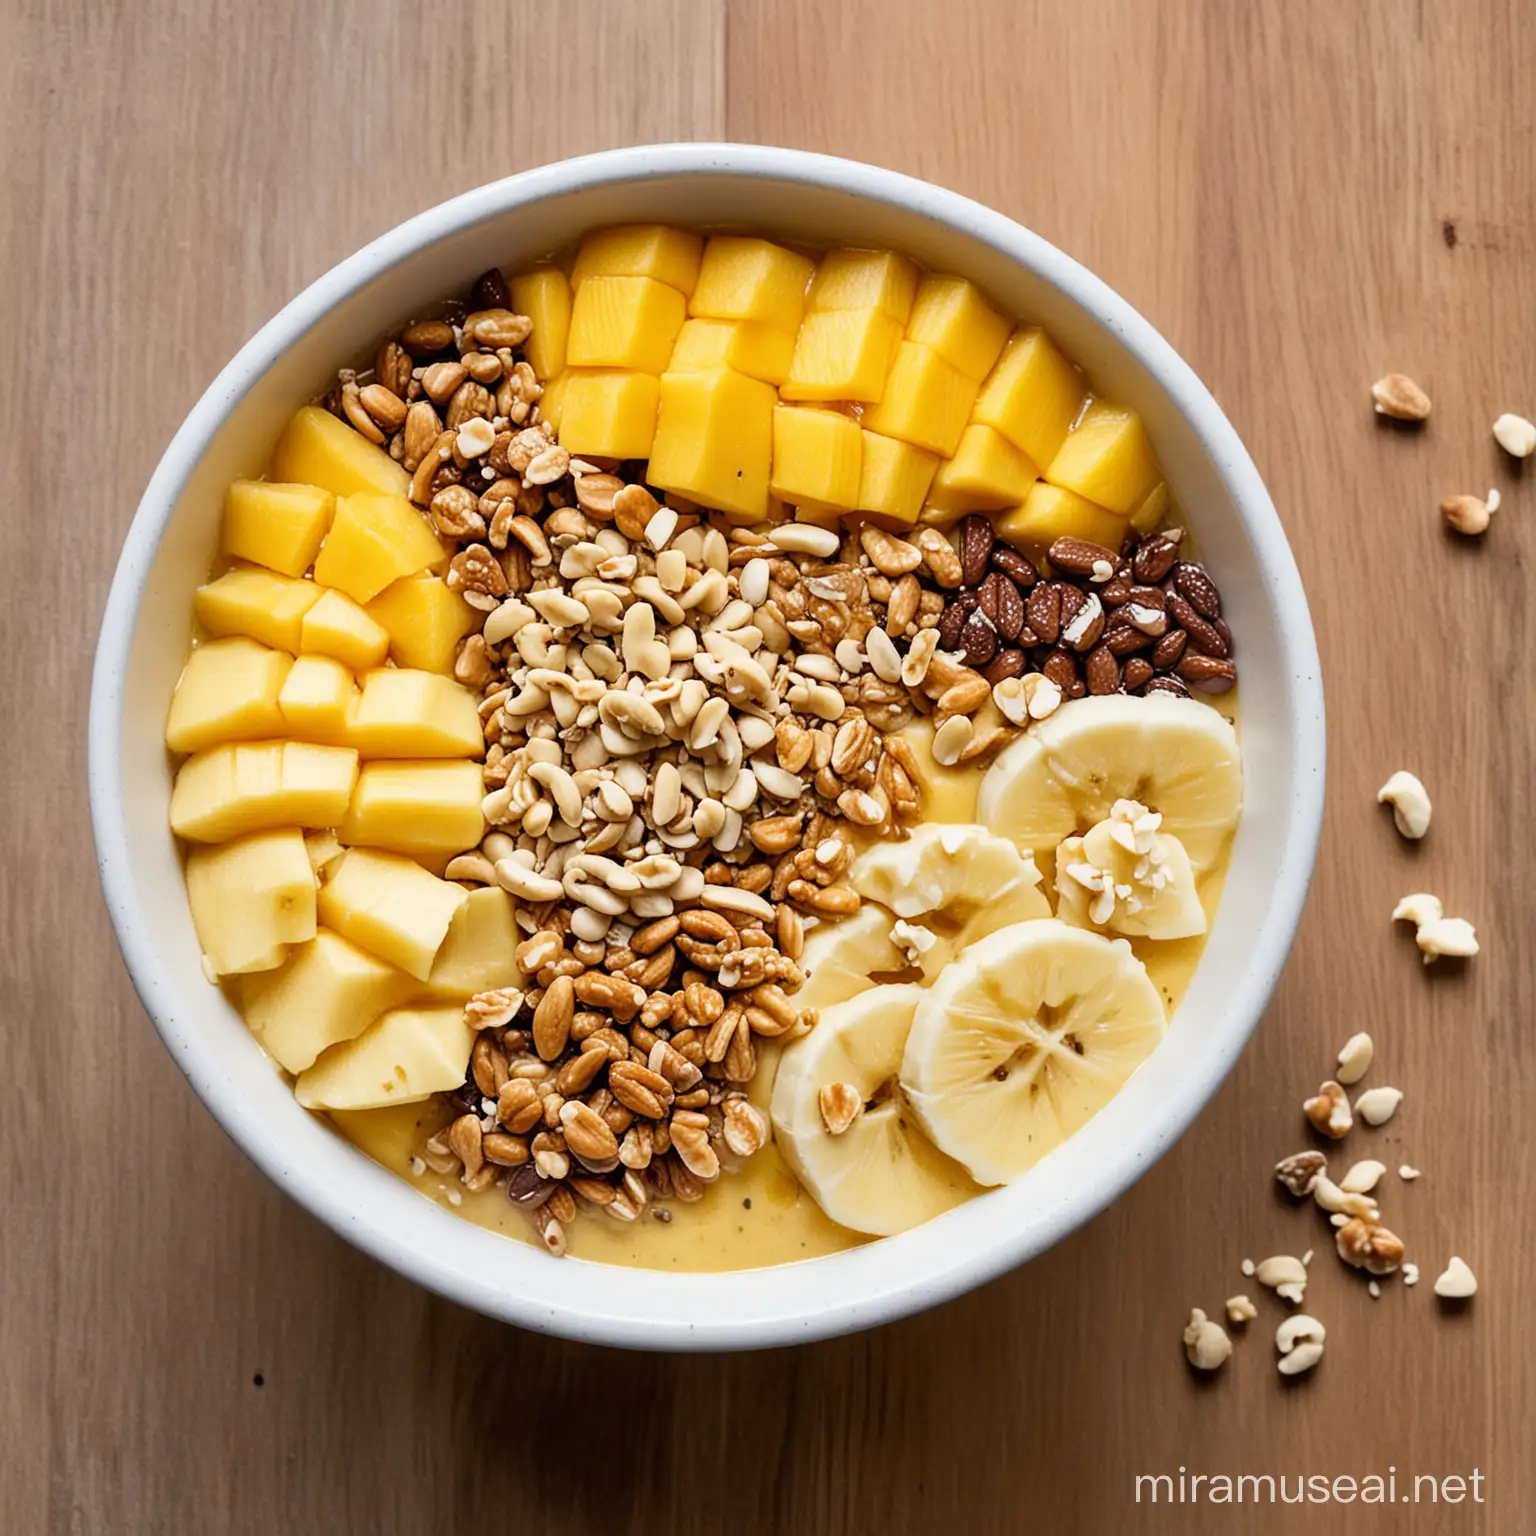 smoothie bowl with diced pineapple, mango and banana slices and crushed nuts on top